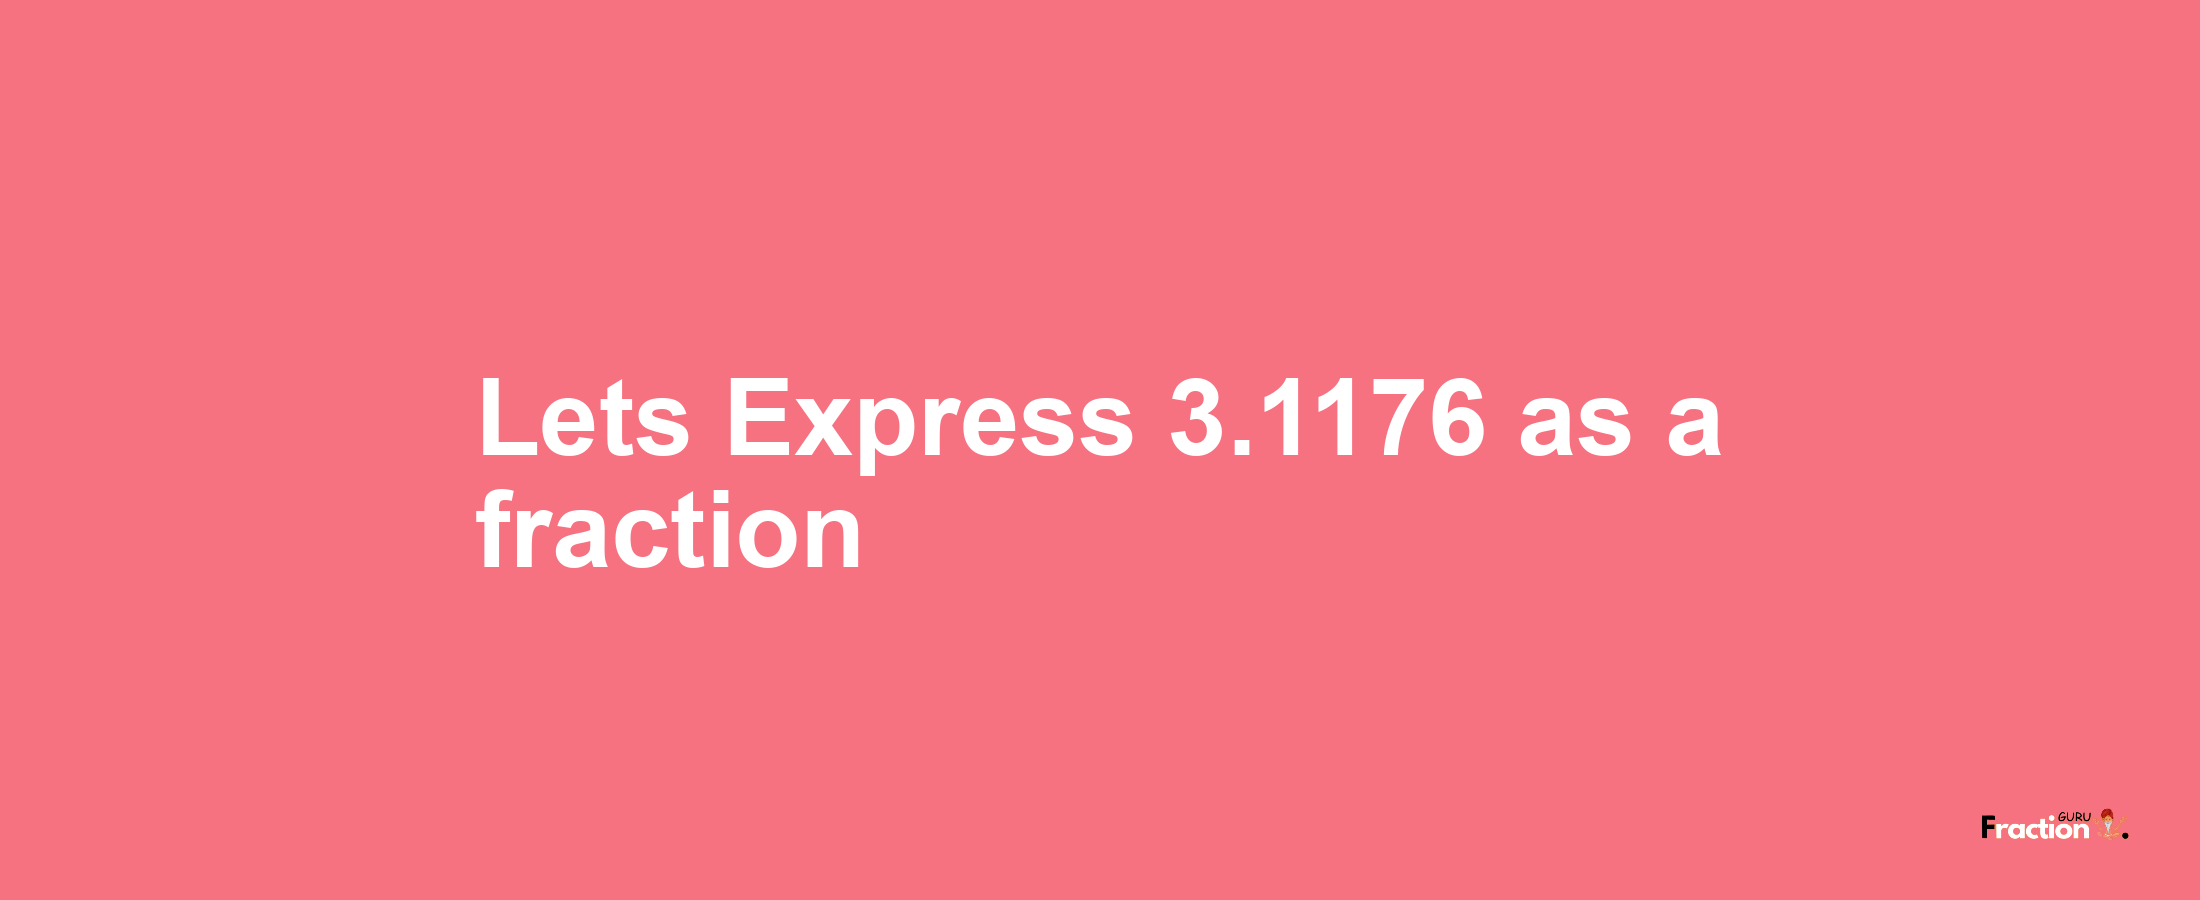 Lets Express 3.1176 as afraction